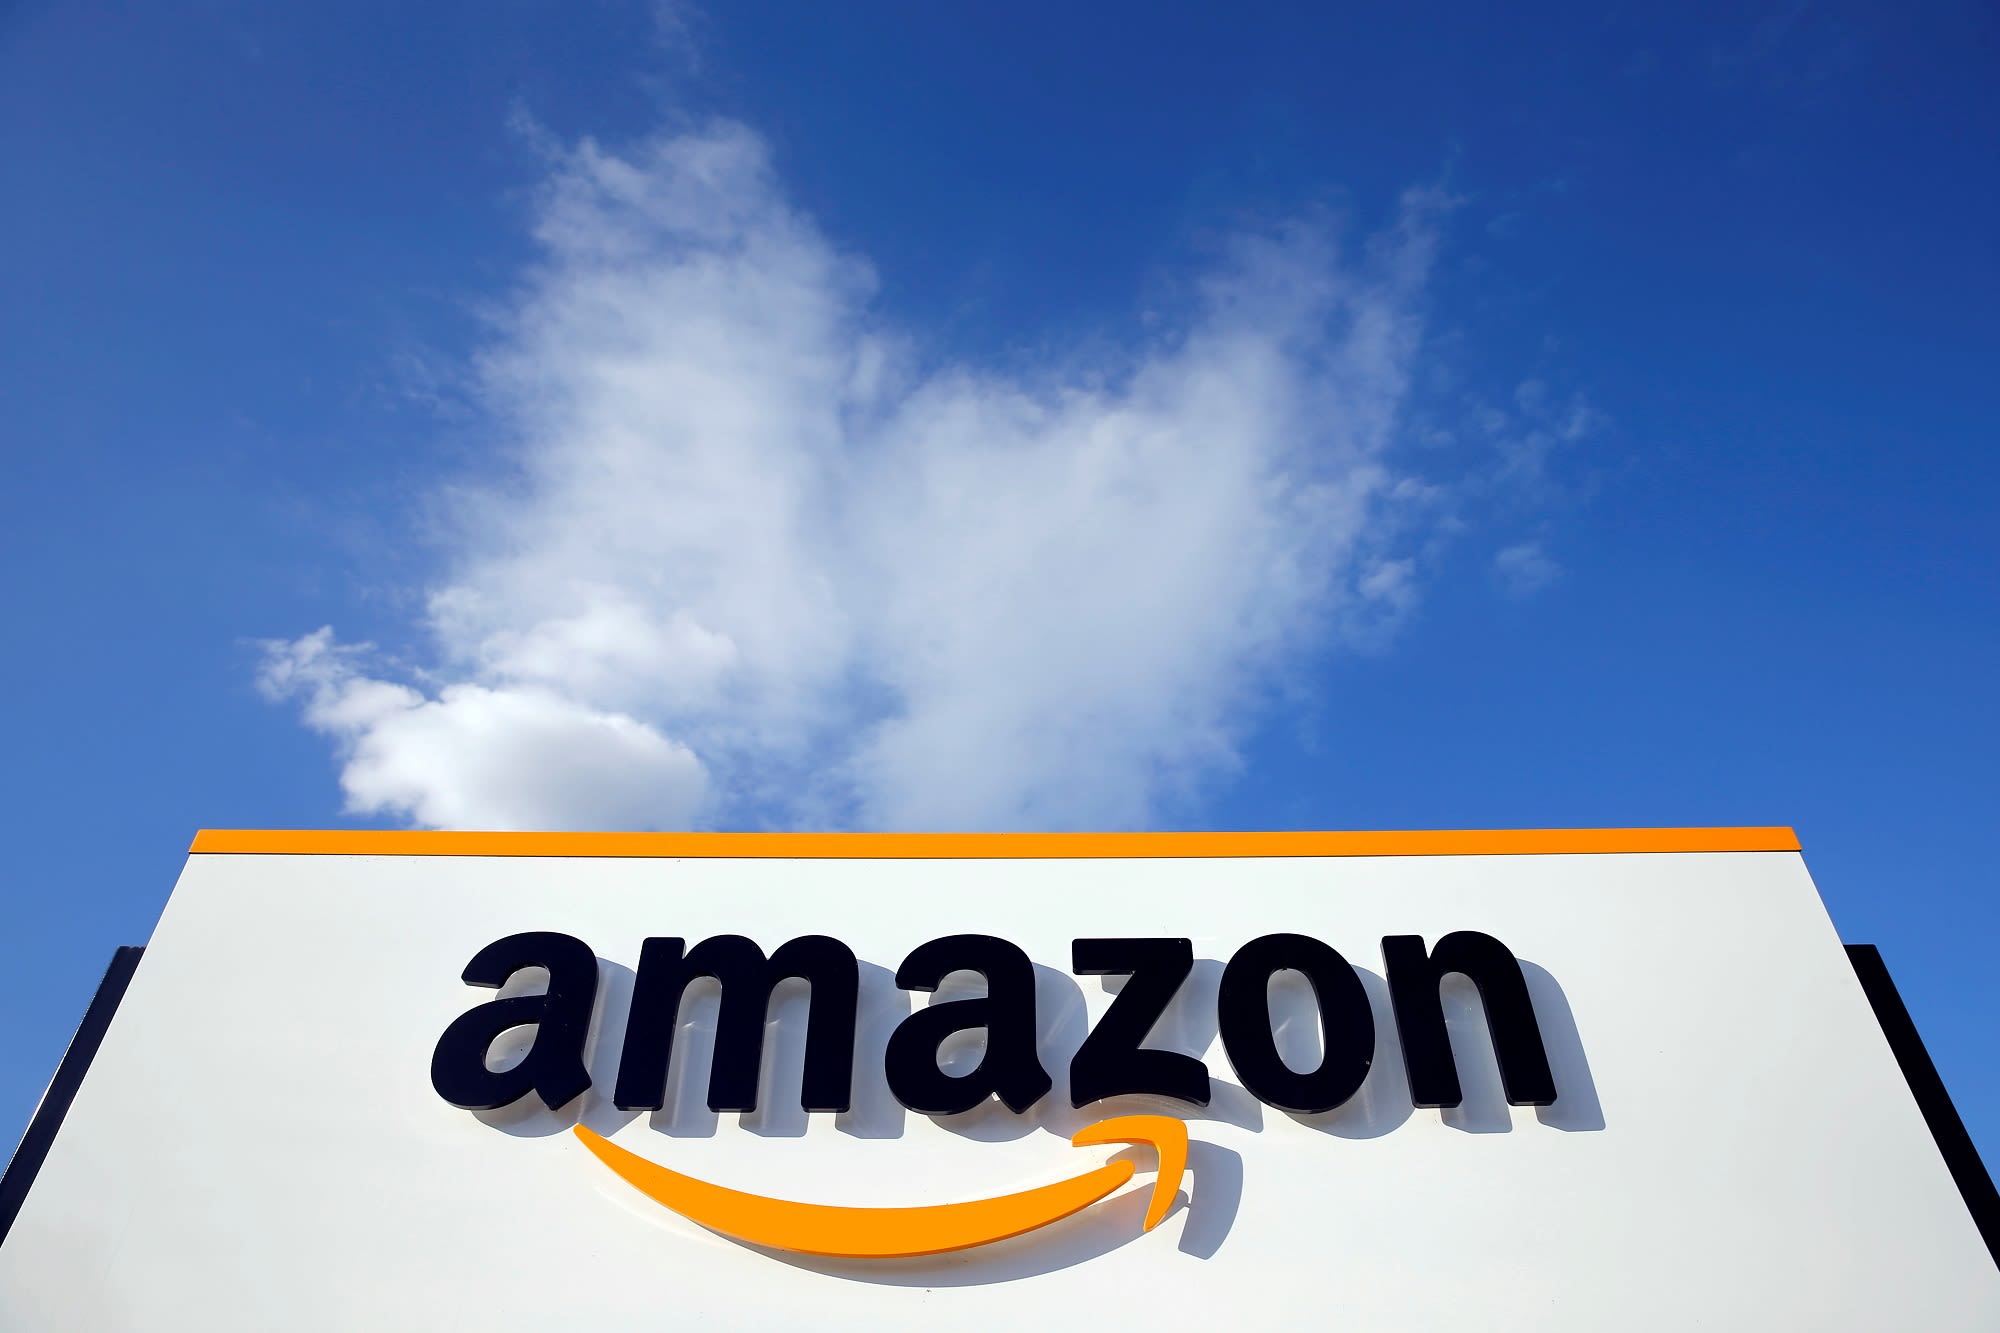 Amazon will debut at NewFronts this year